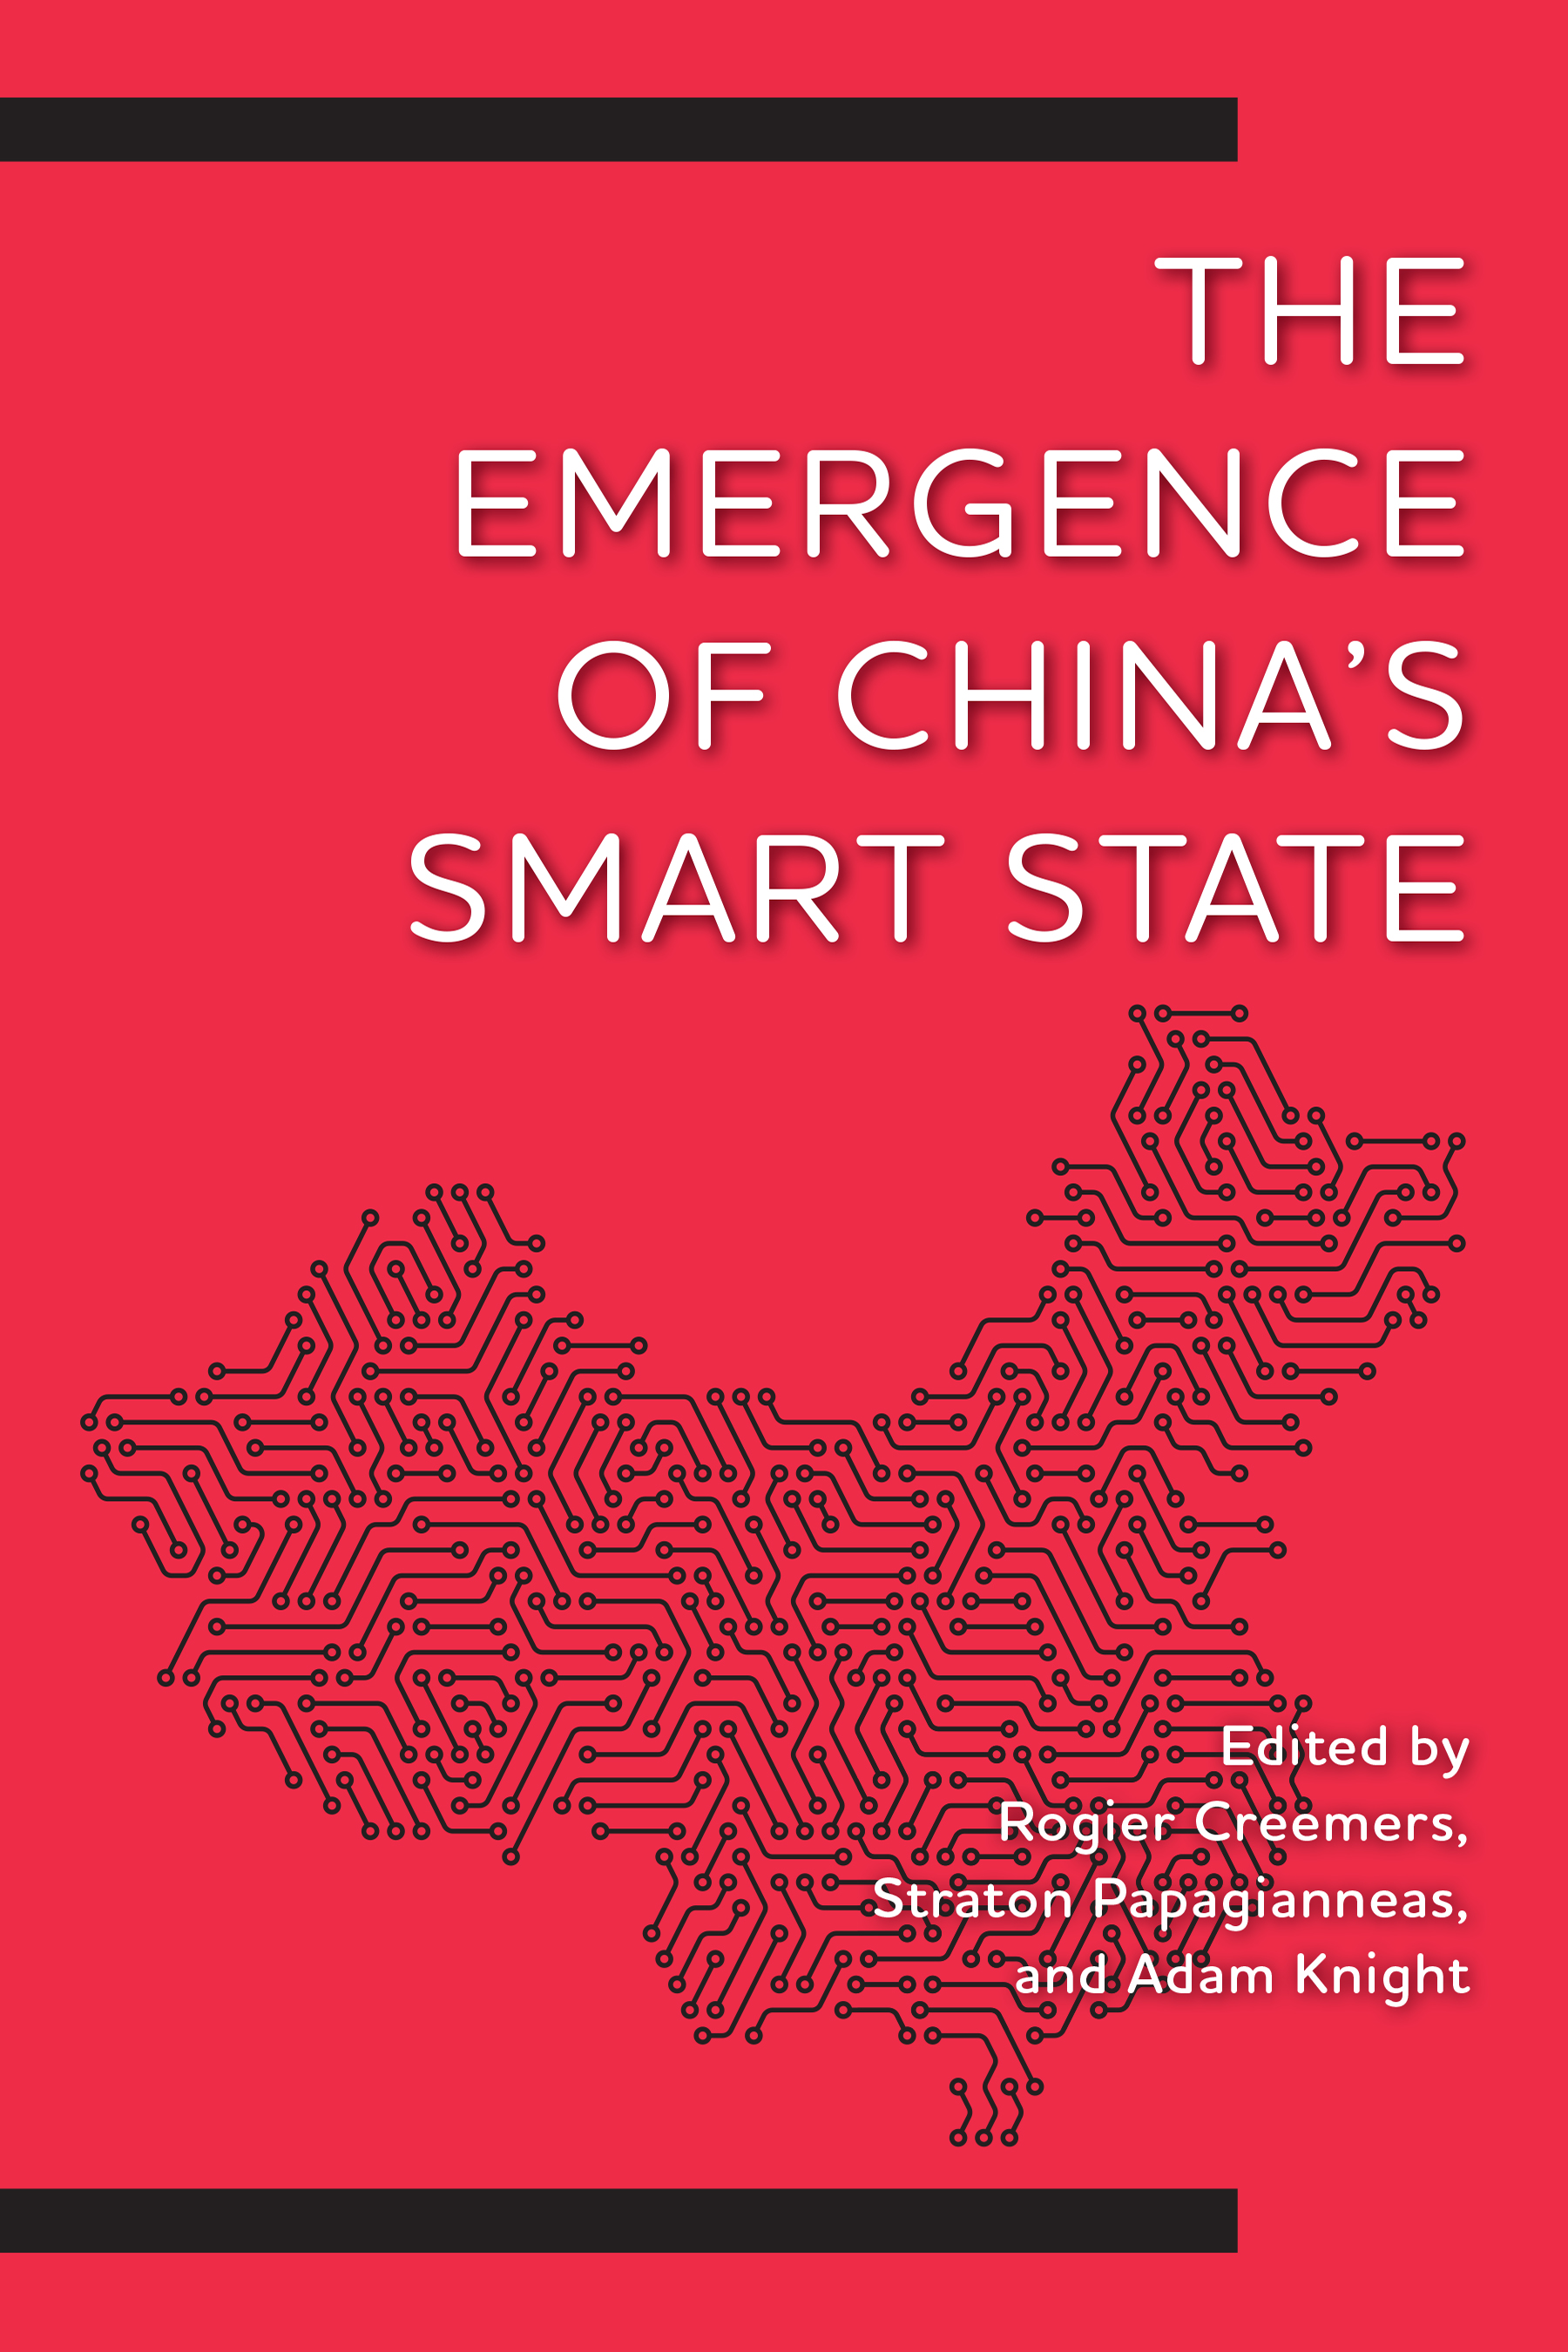 The Emergence of China's Smart State